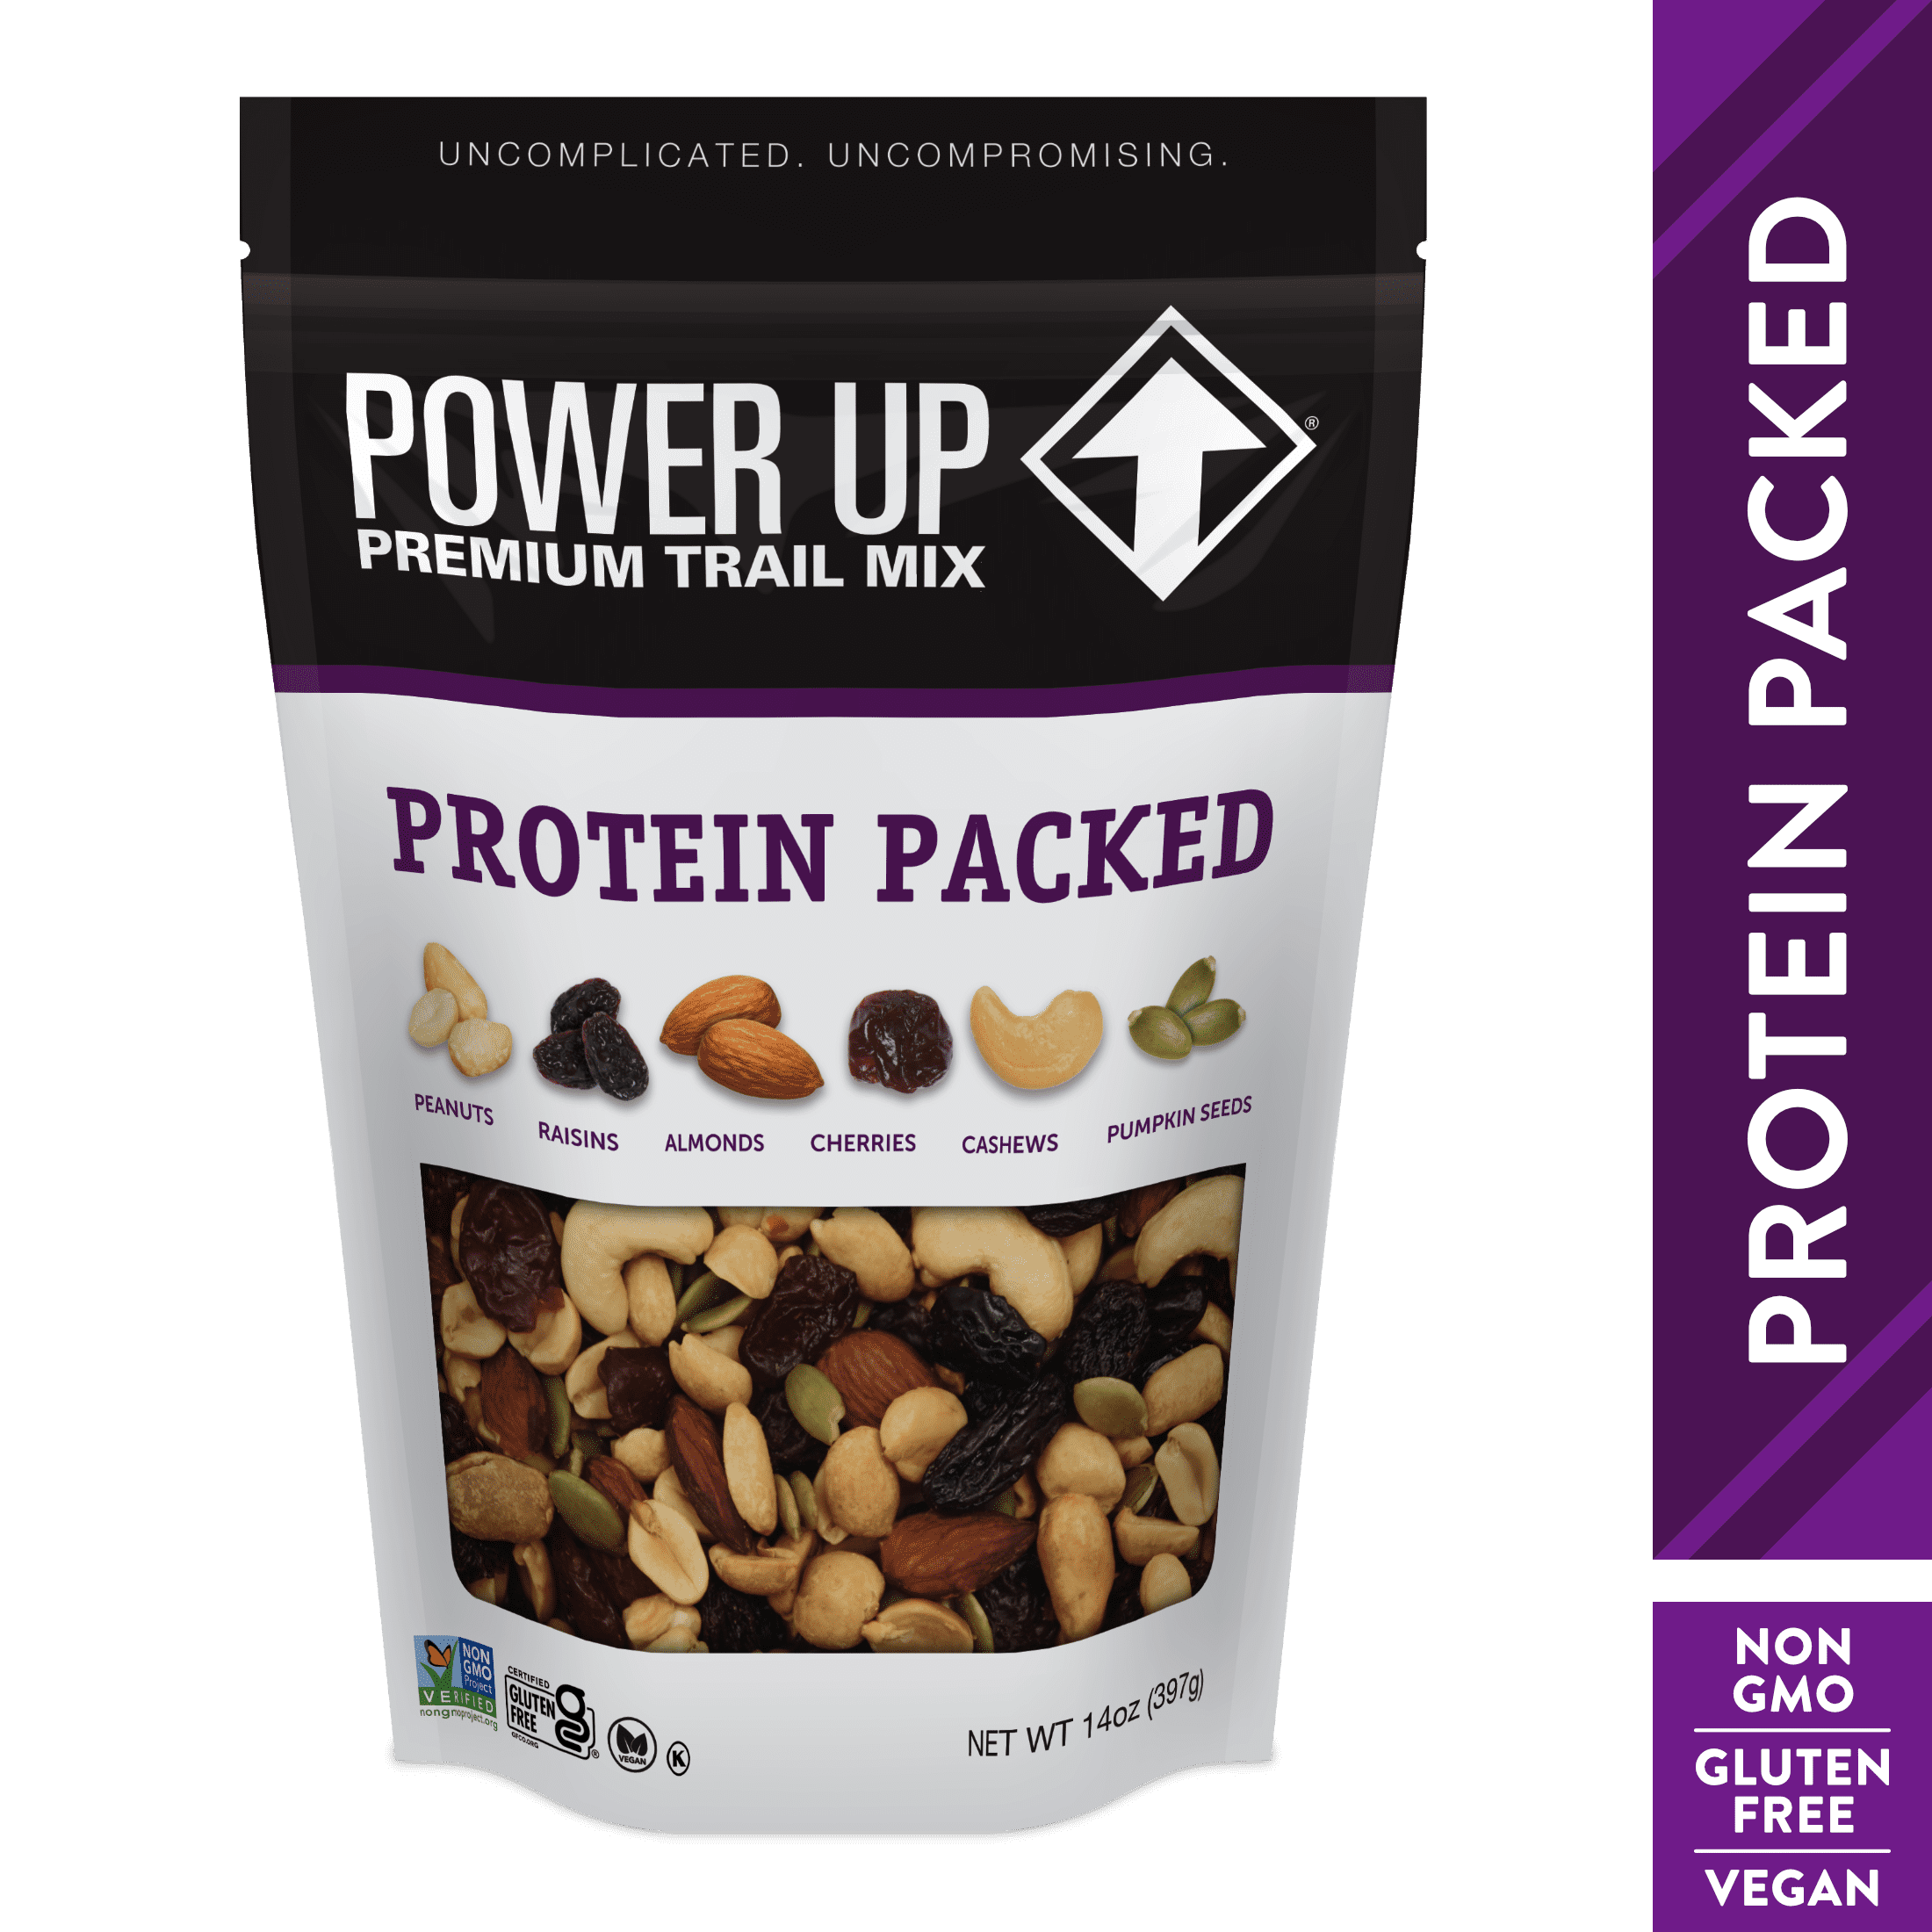 Power Up Protein Packed Trail from Gourmet Nut, 14 oz. Bag, Gluten Free, Good Source of Protein - Walmart.com